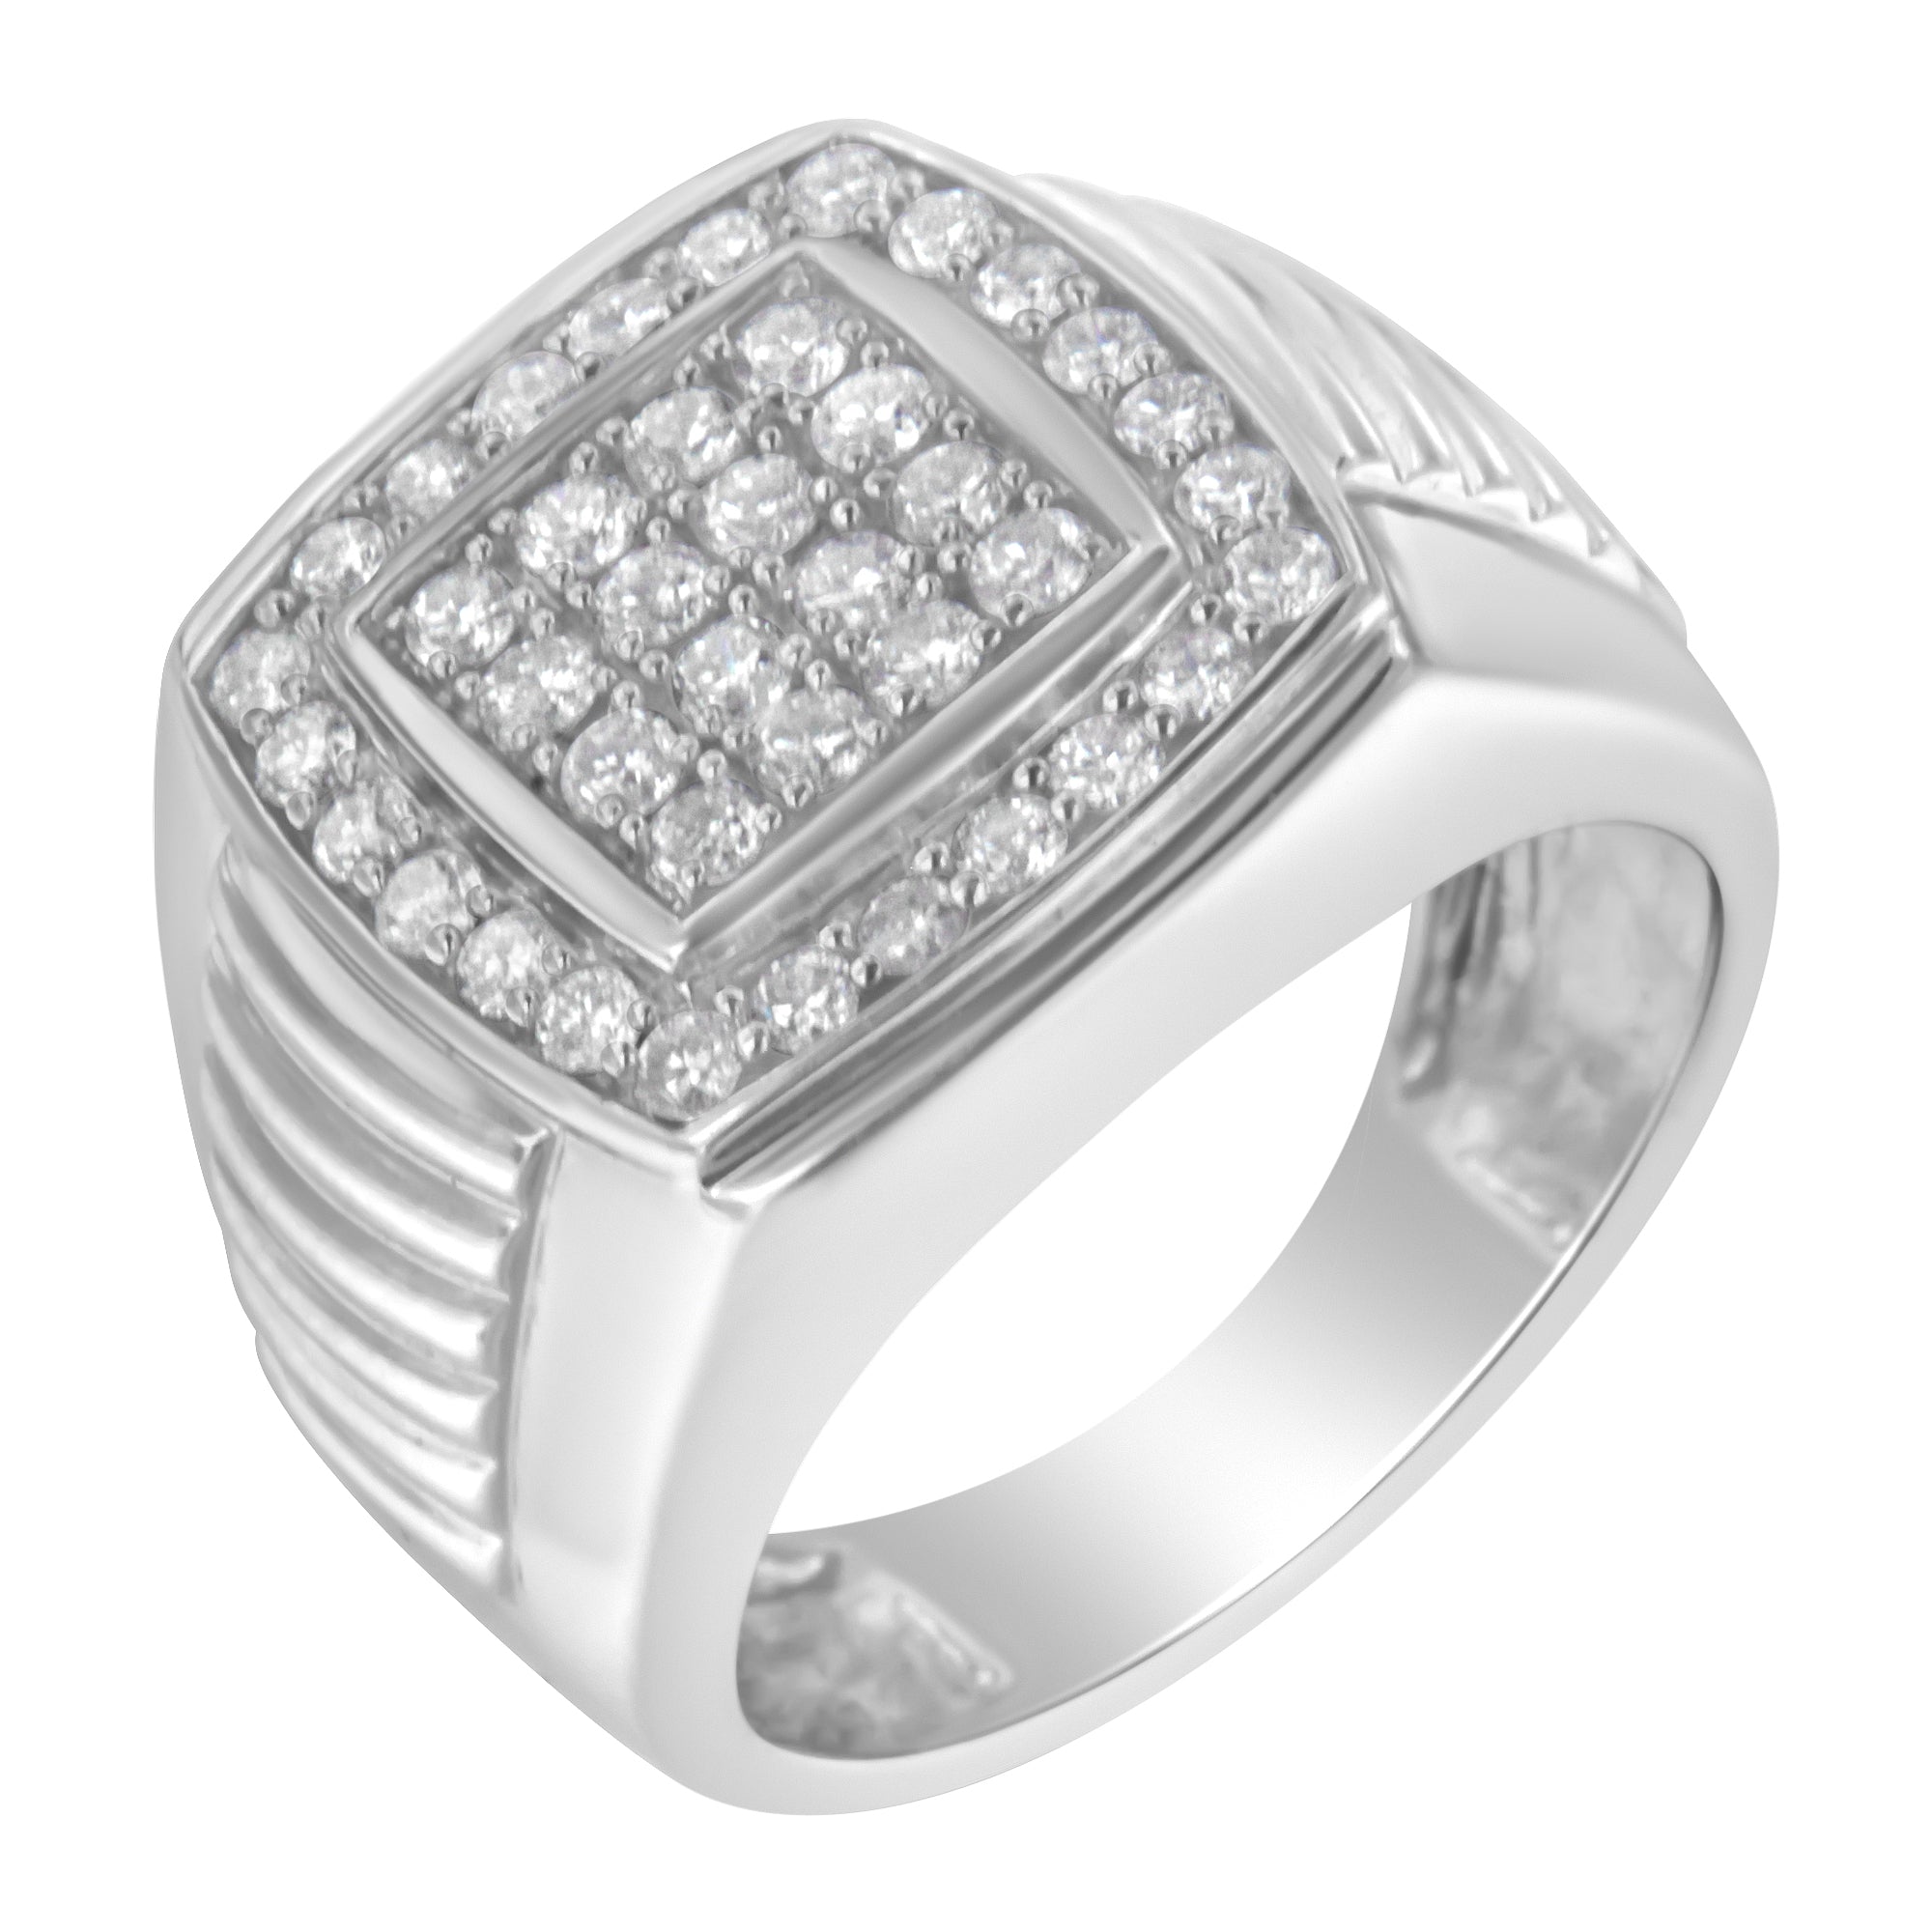 14K White Gold Men's Diamond Squared Band Ring (1 cttw, H-I Color, SI2-I1 Clarity) - LinkagejewelrydesignLinkagejewelrydesign